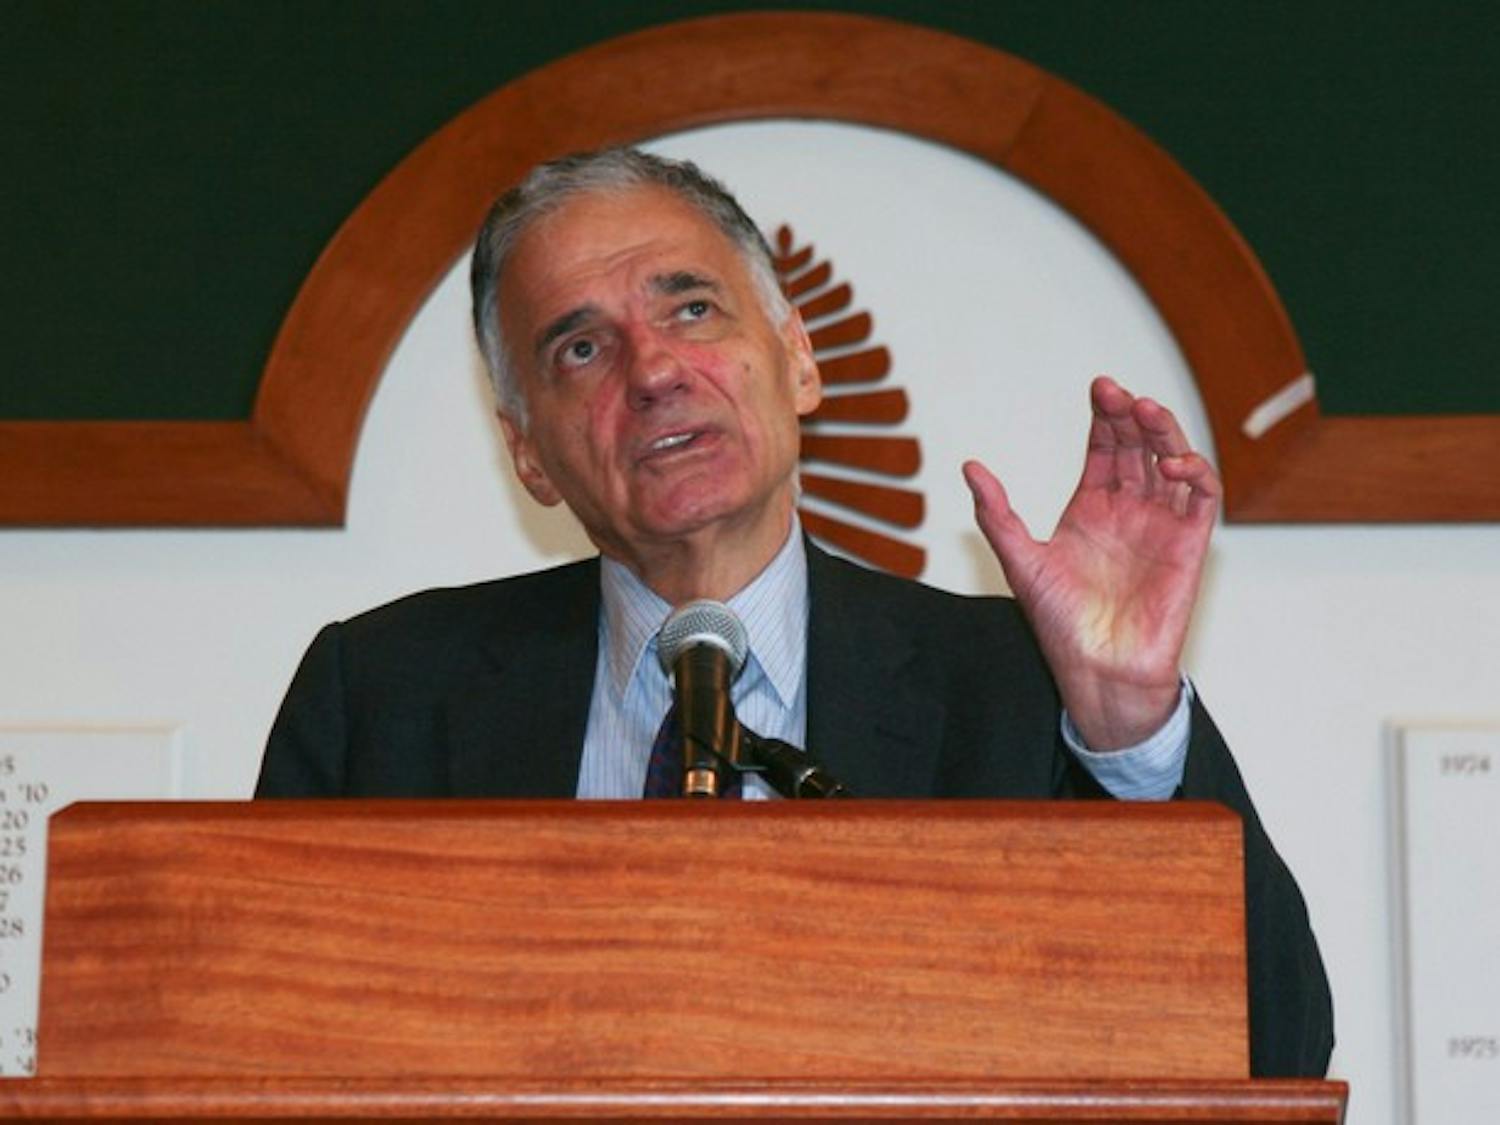 Ralph Nader, 2008 independent candidate for president, spoke on Monday about his candidacy, the government's bailout and his competition.